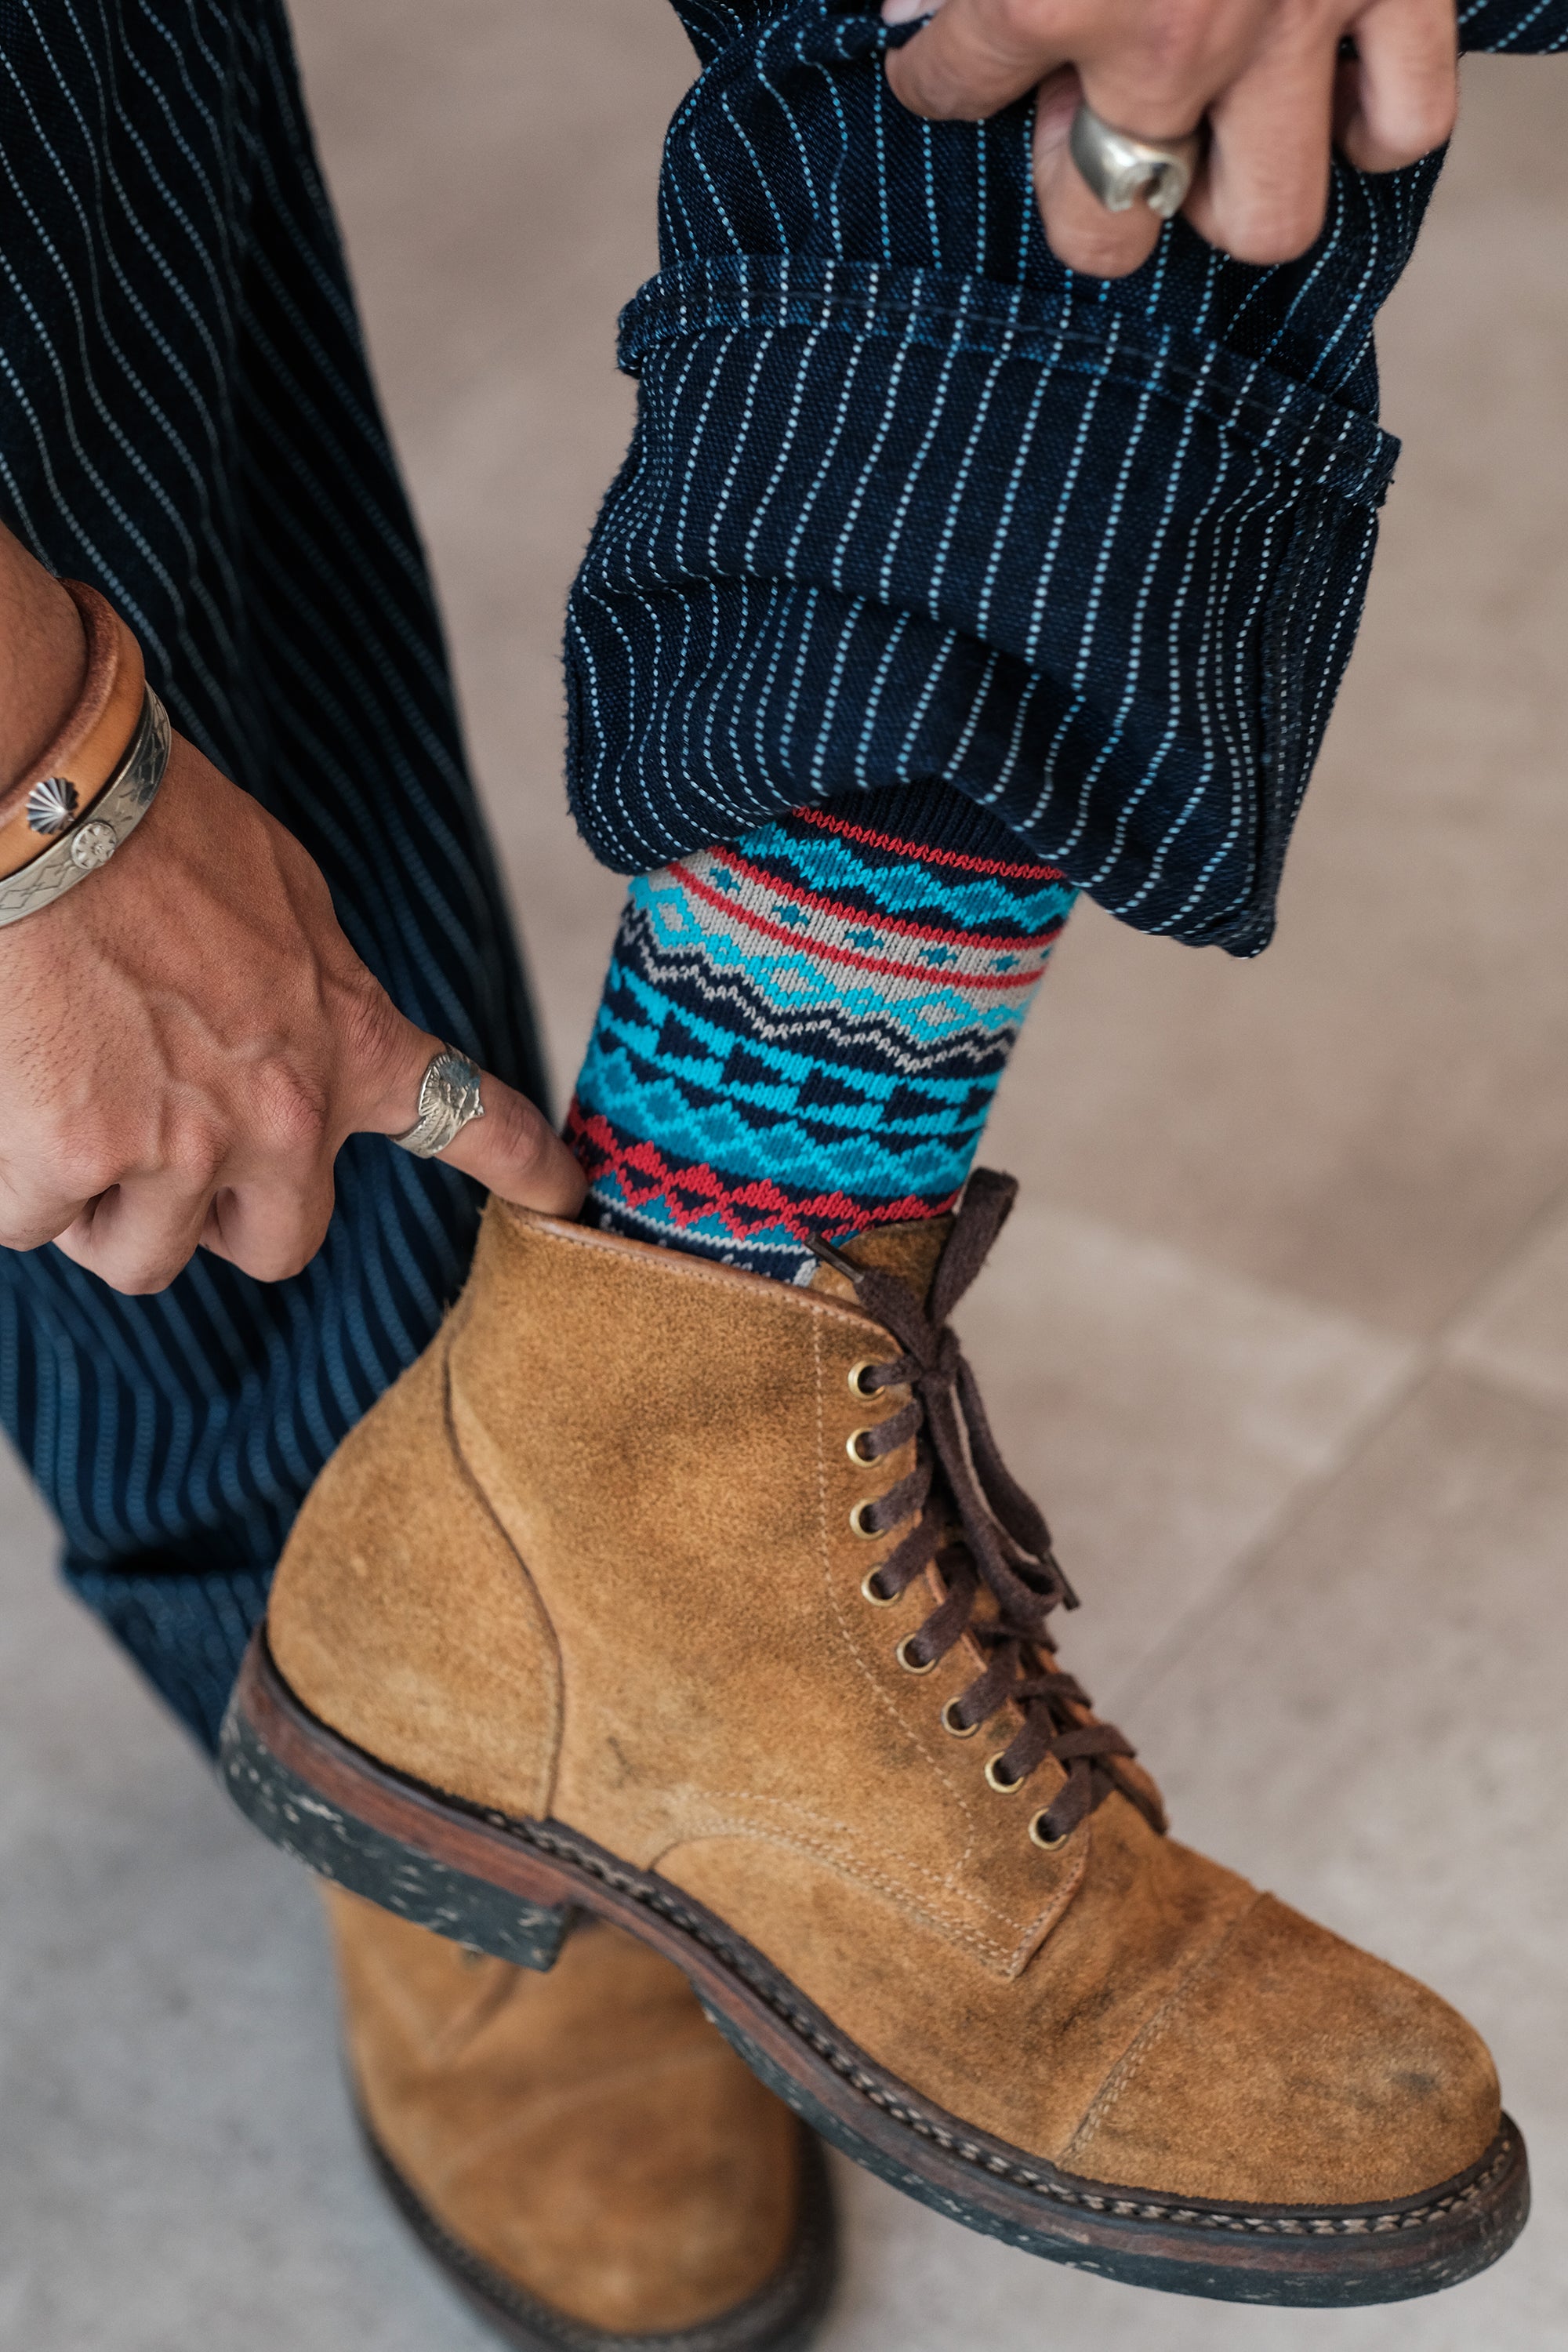 dylan blue tribal socks with khaki boots